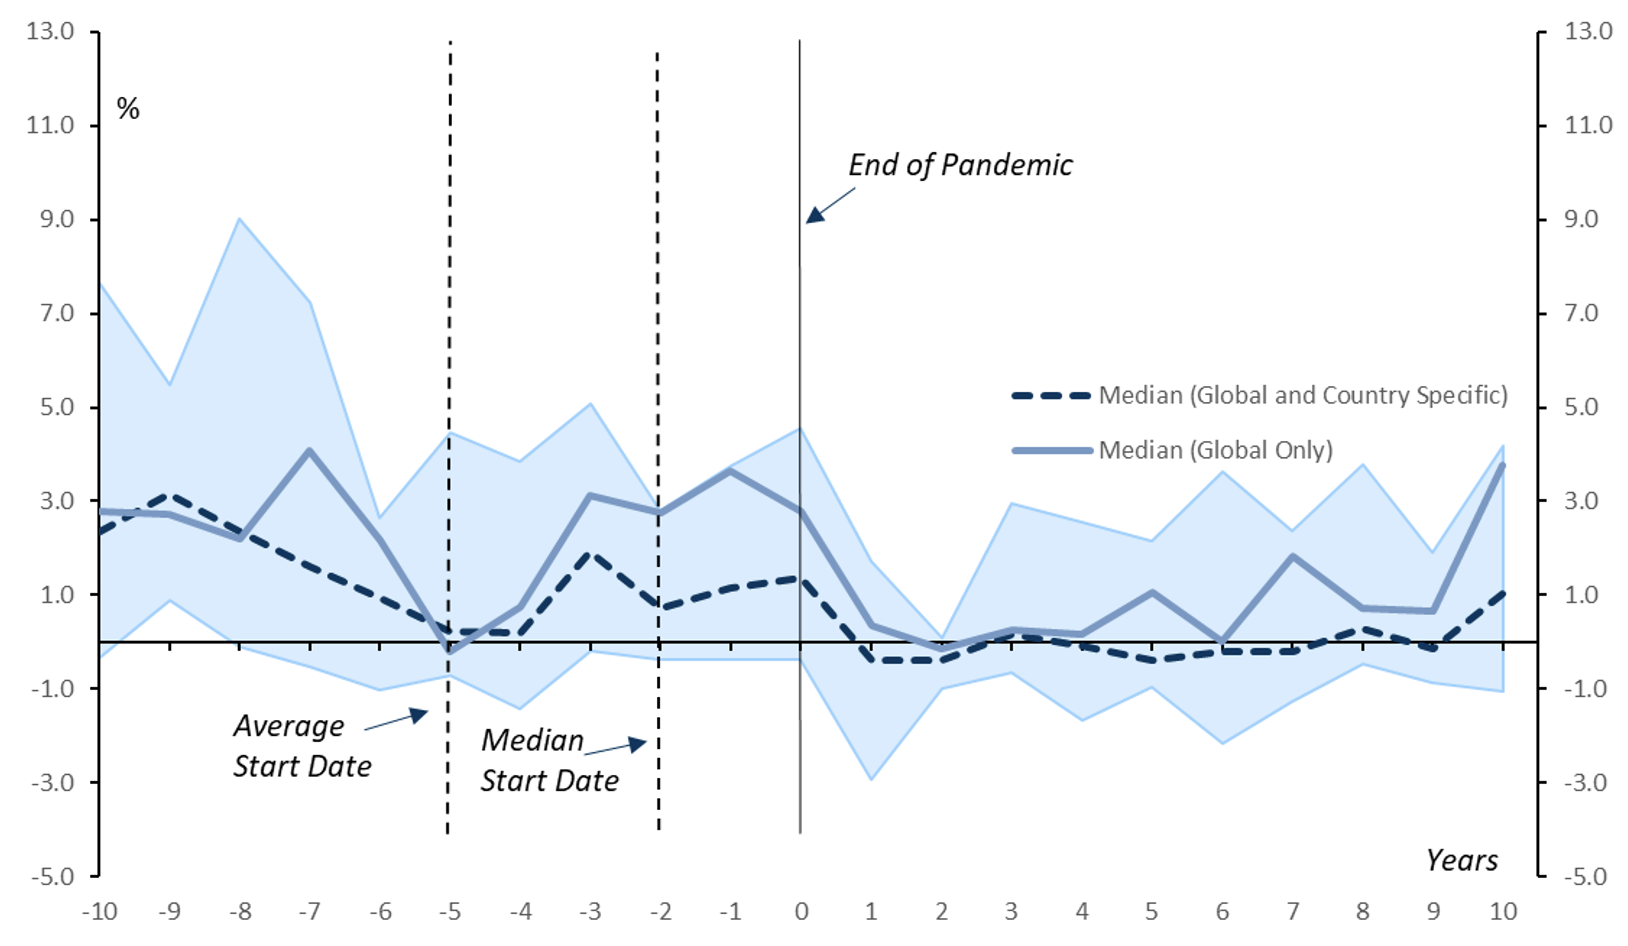 Figure 2. Inflation has Typically Remained Weak in the Aftermath of Major Pandemics